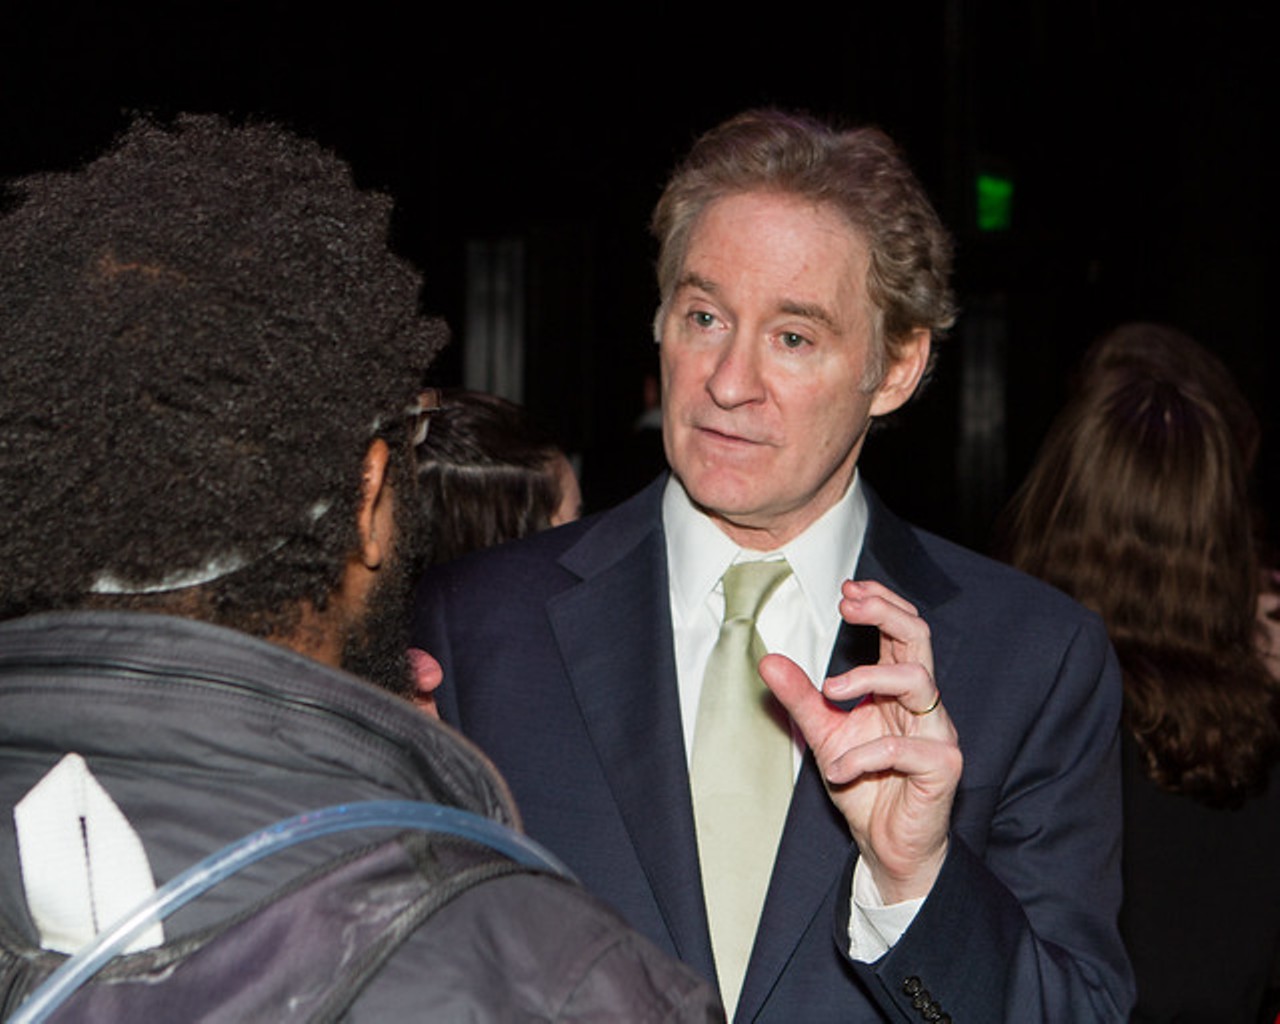 Kevin Kline
Famous actor and singer Kevin Kline has won both Academy Awards and Tony Awards, but he also wins the award for best hometown: Kline was born in St. Louis and went to Saint Louis Priory School.
Photo credit: Devon Christopher Adams / Flickr